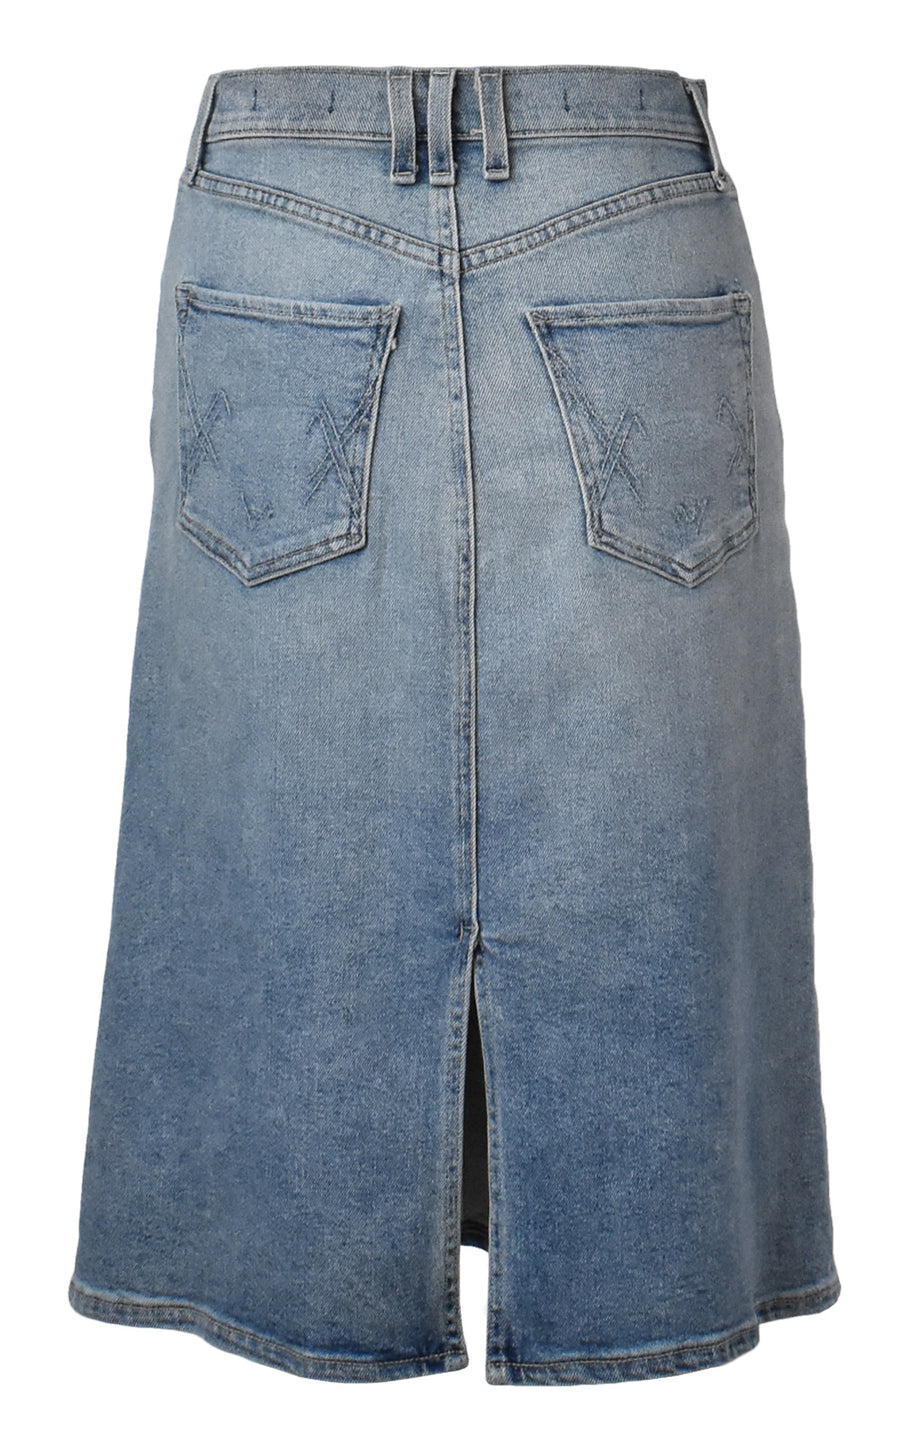 McGuire I Got You Babe Knee Length Denim Jean Skirt – The Renowned Shop